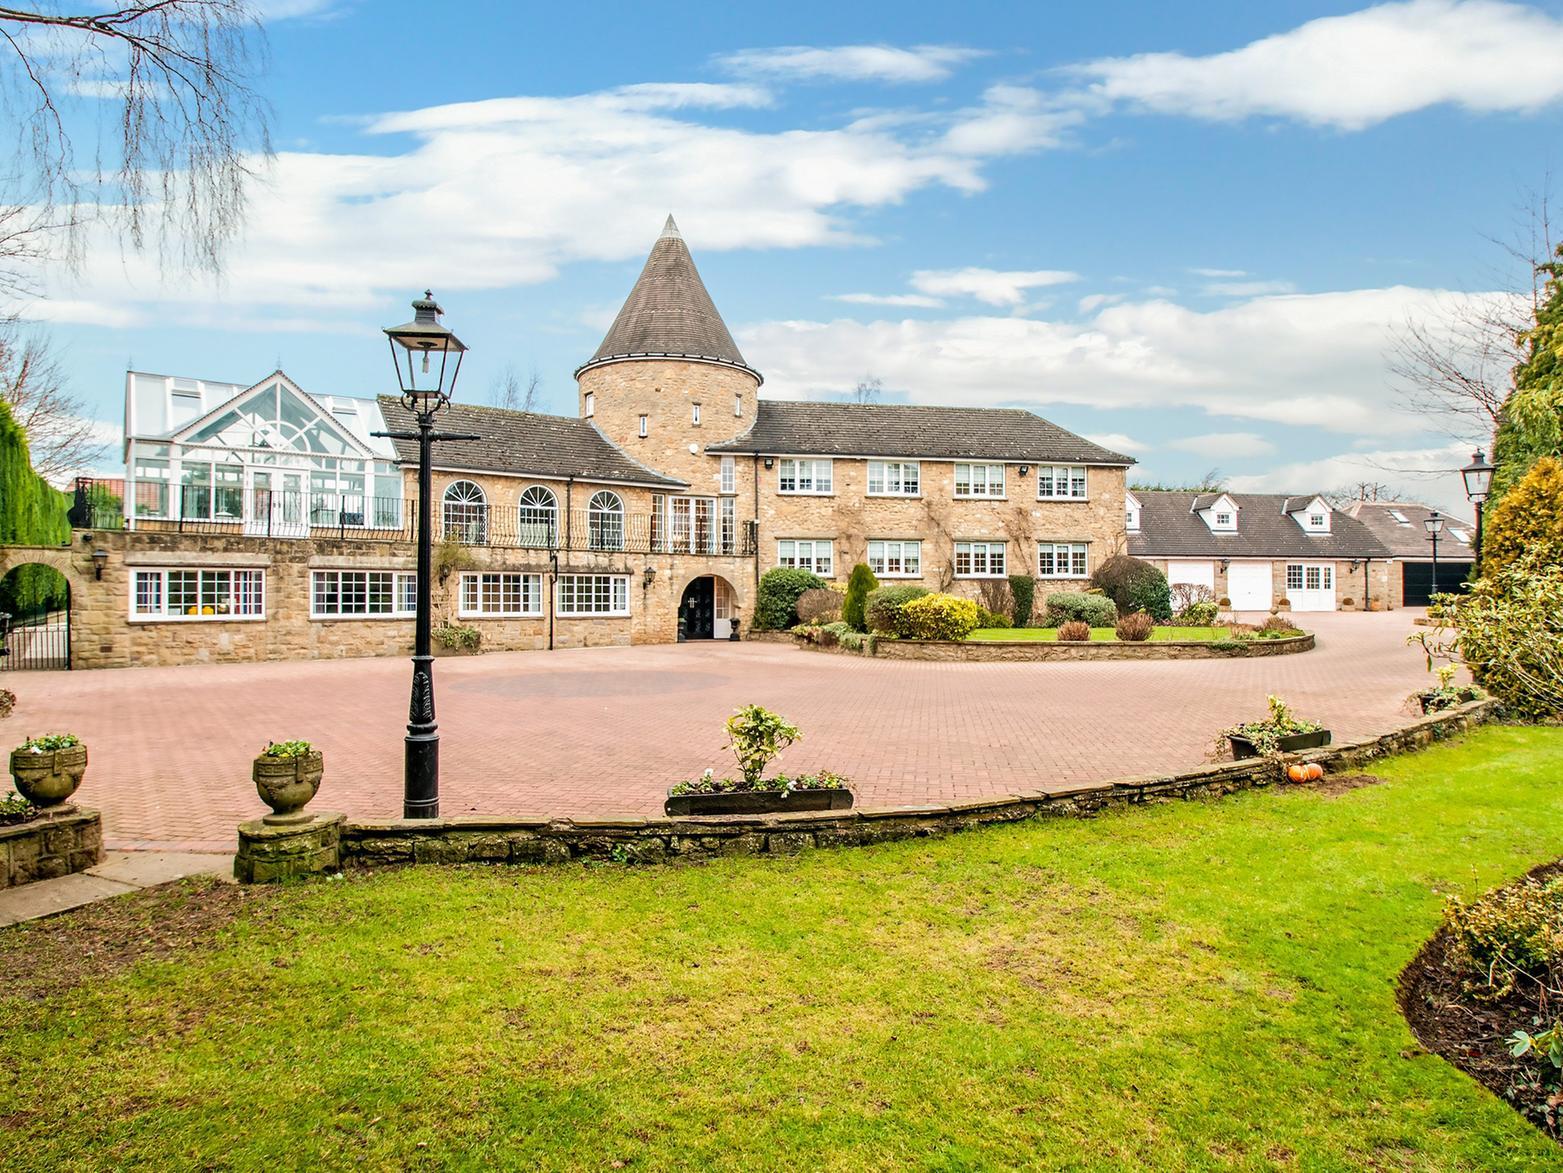 The best 10 homes currently for sale in Harrogate with Carter Jonas.